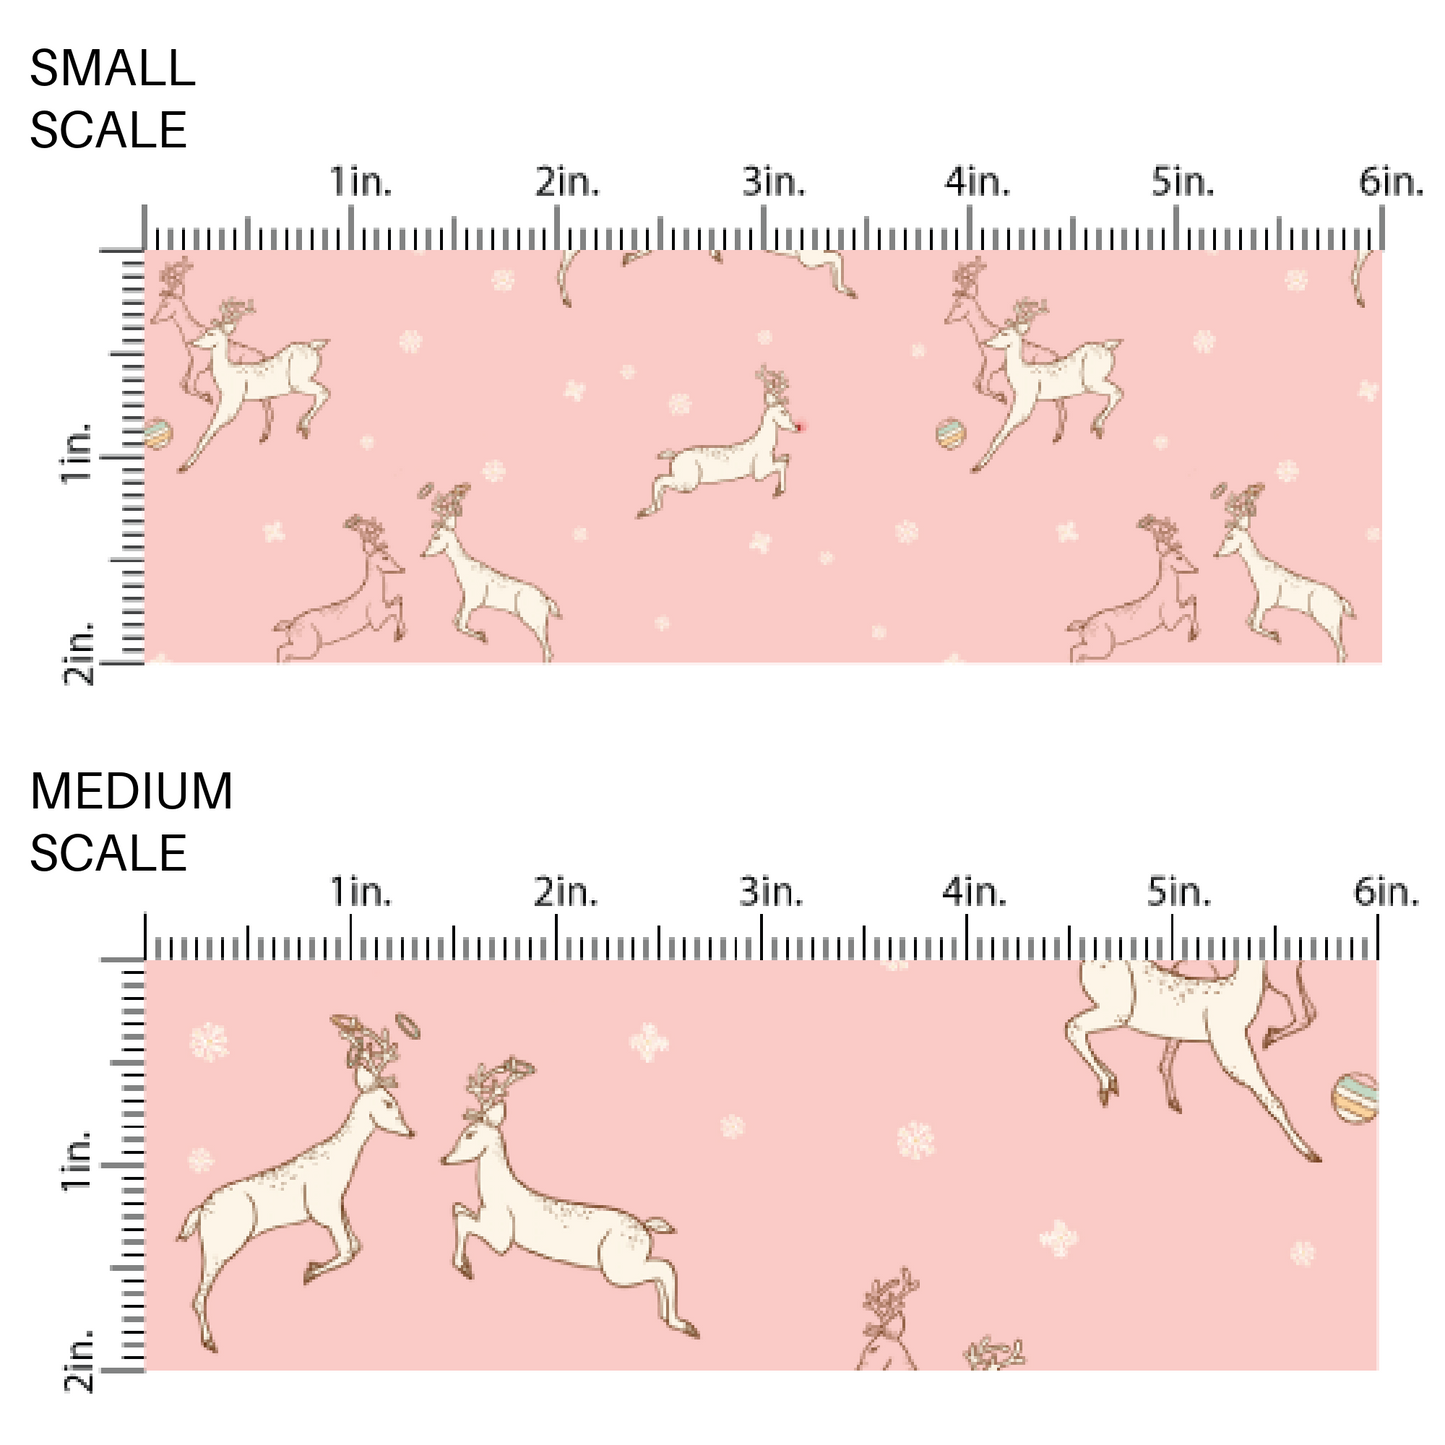 Fabric scaling guide reindeer games